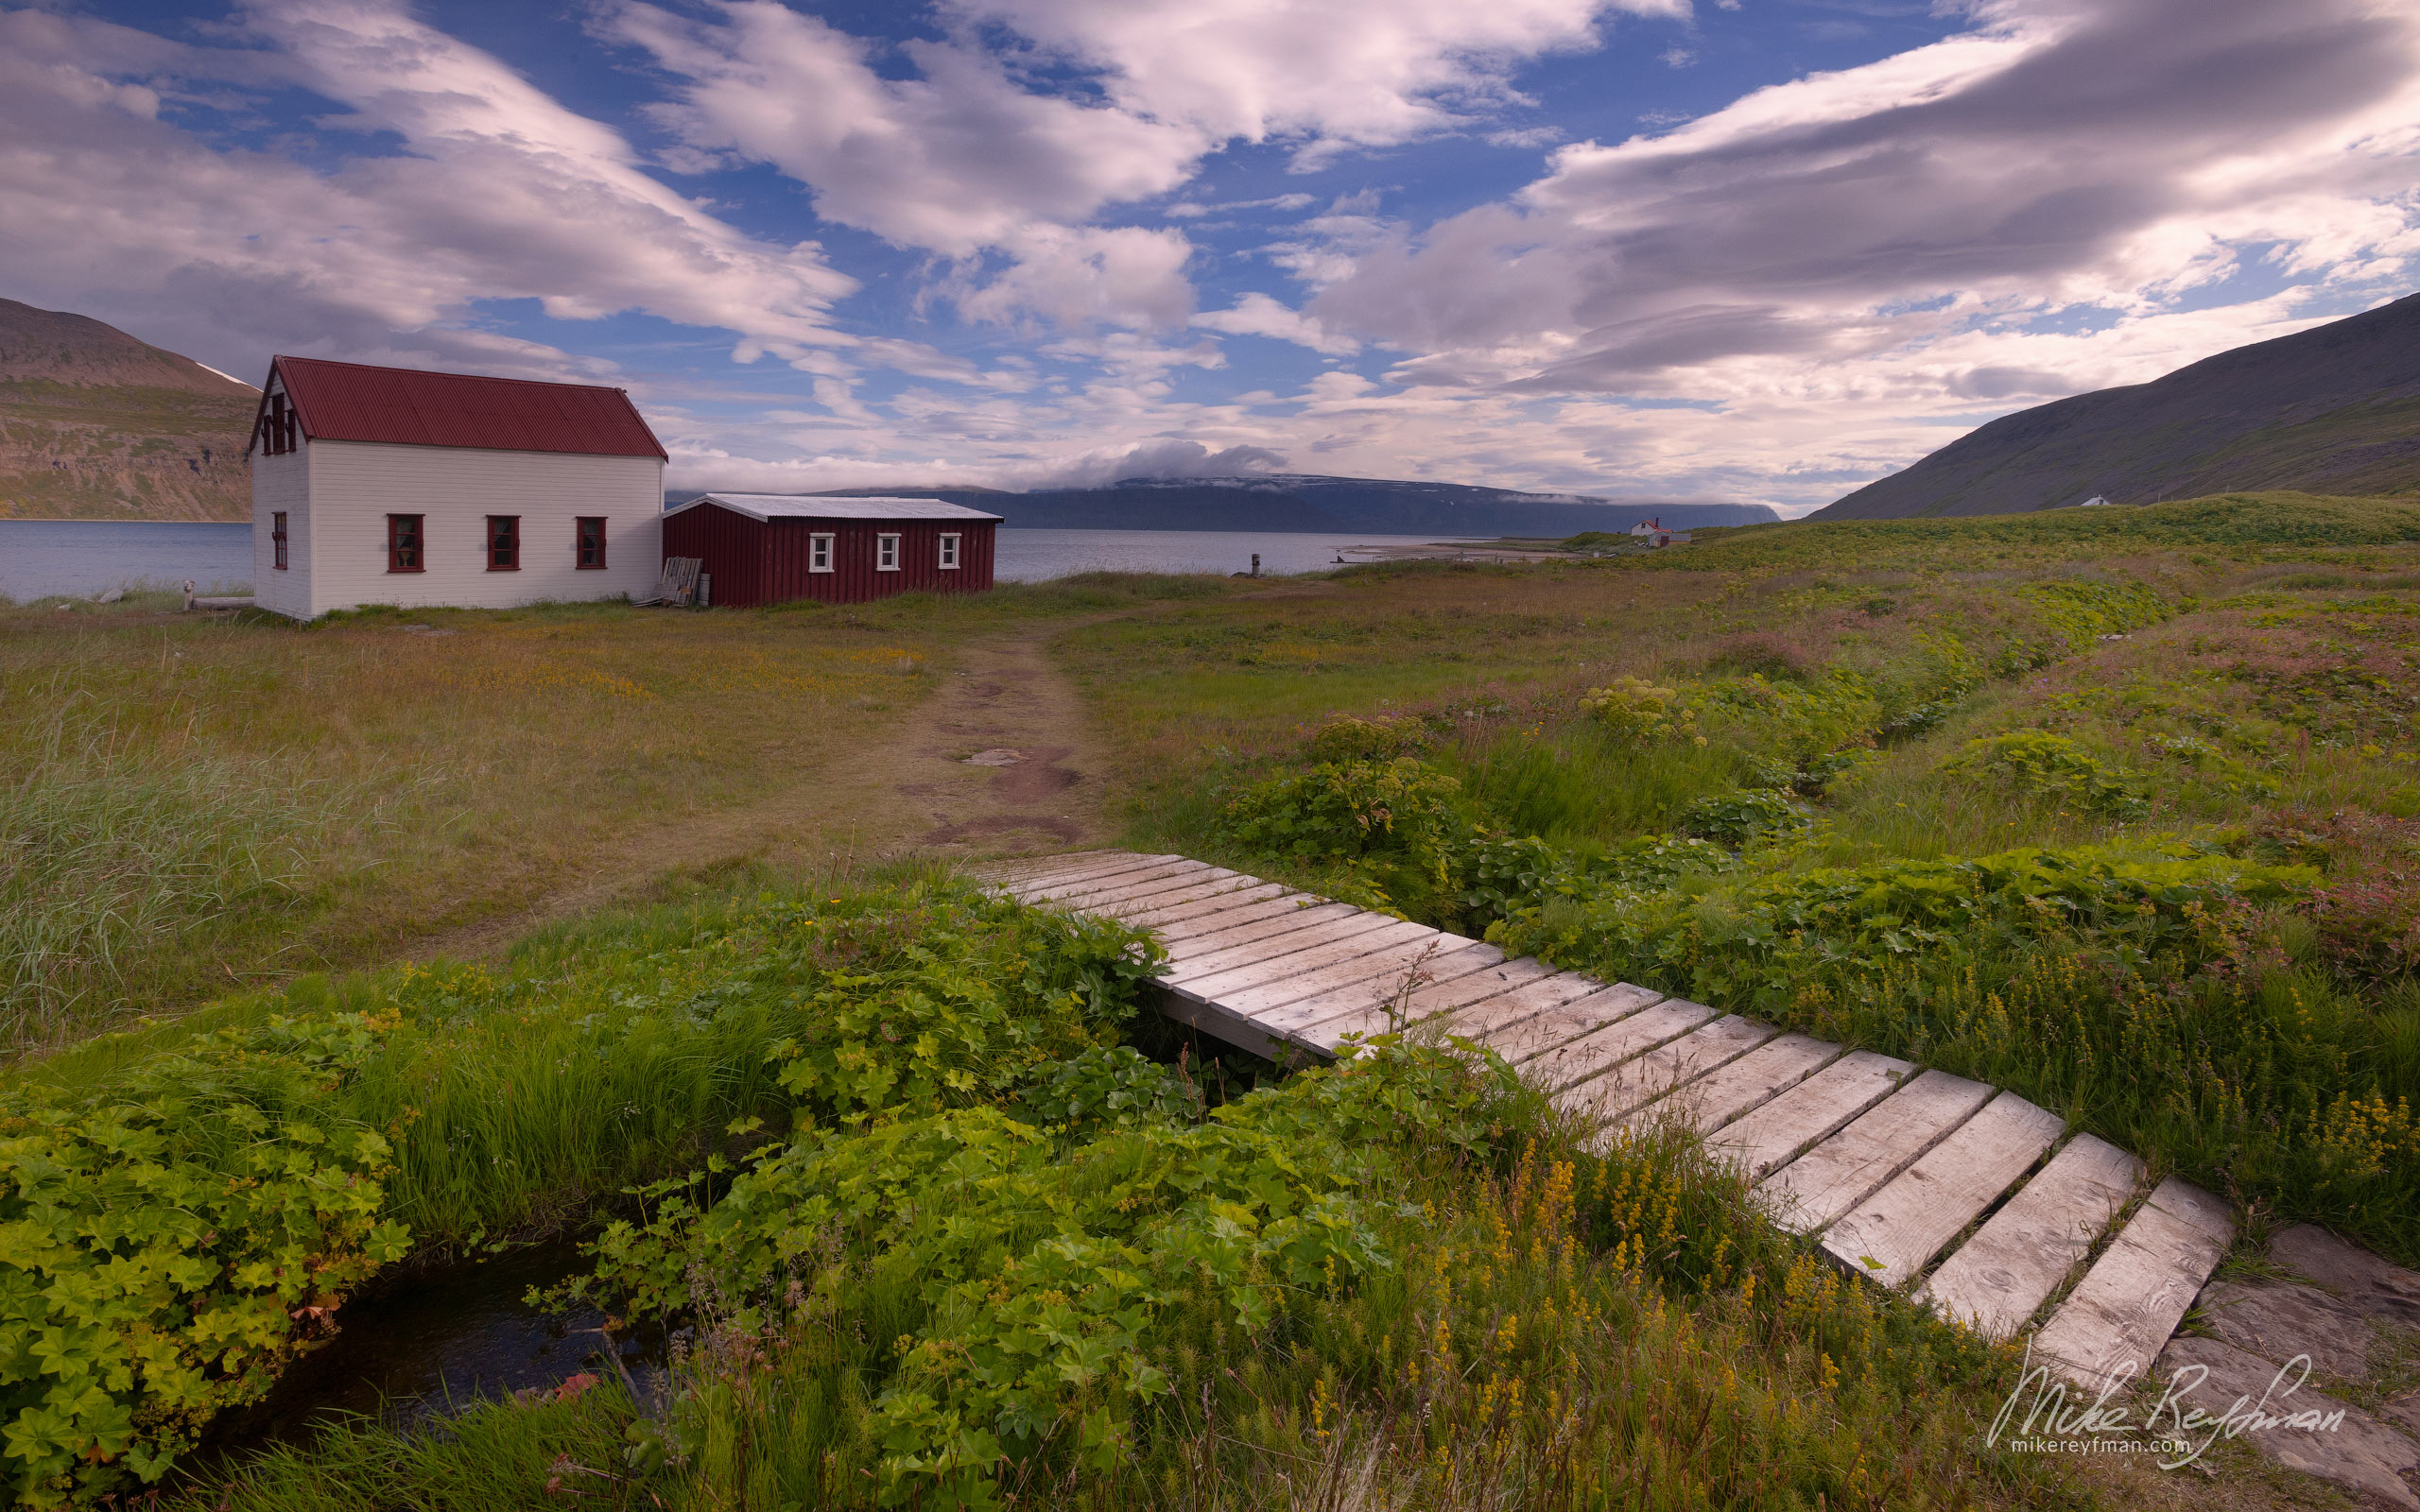 Old Doctor's House in the abandoned village of Hesteyri. Westfjords, Iceland. 098-IC-CL_P3X3614 - Where Lava Meets the Ocean. Iceland coastline. - Mike Reyfman Photography